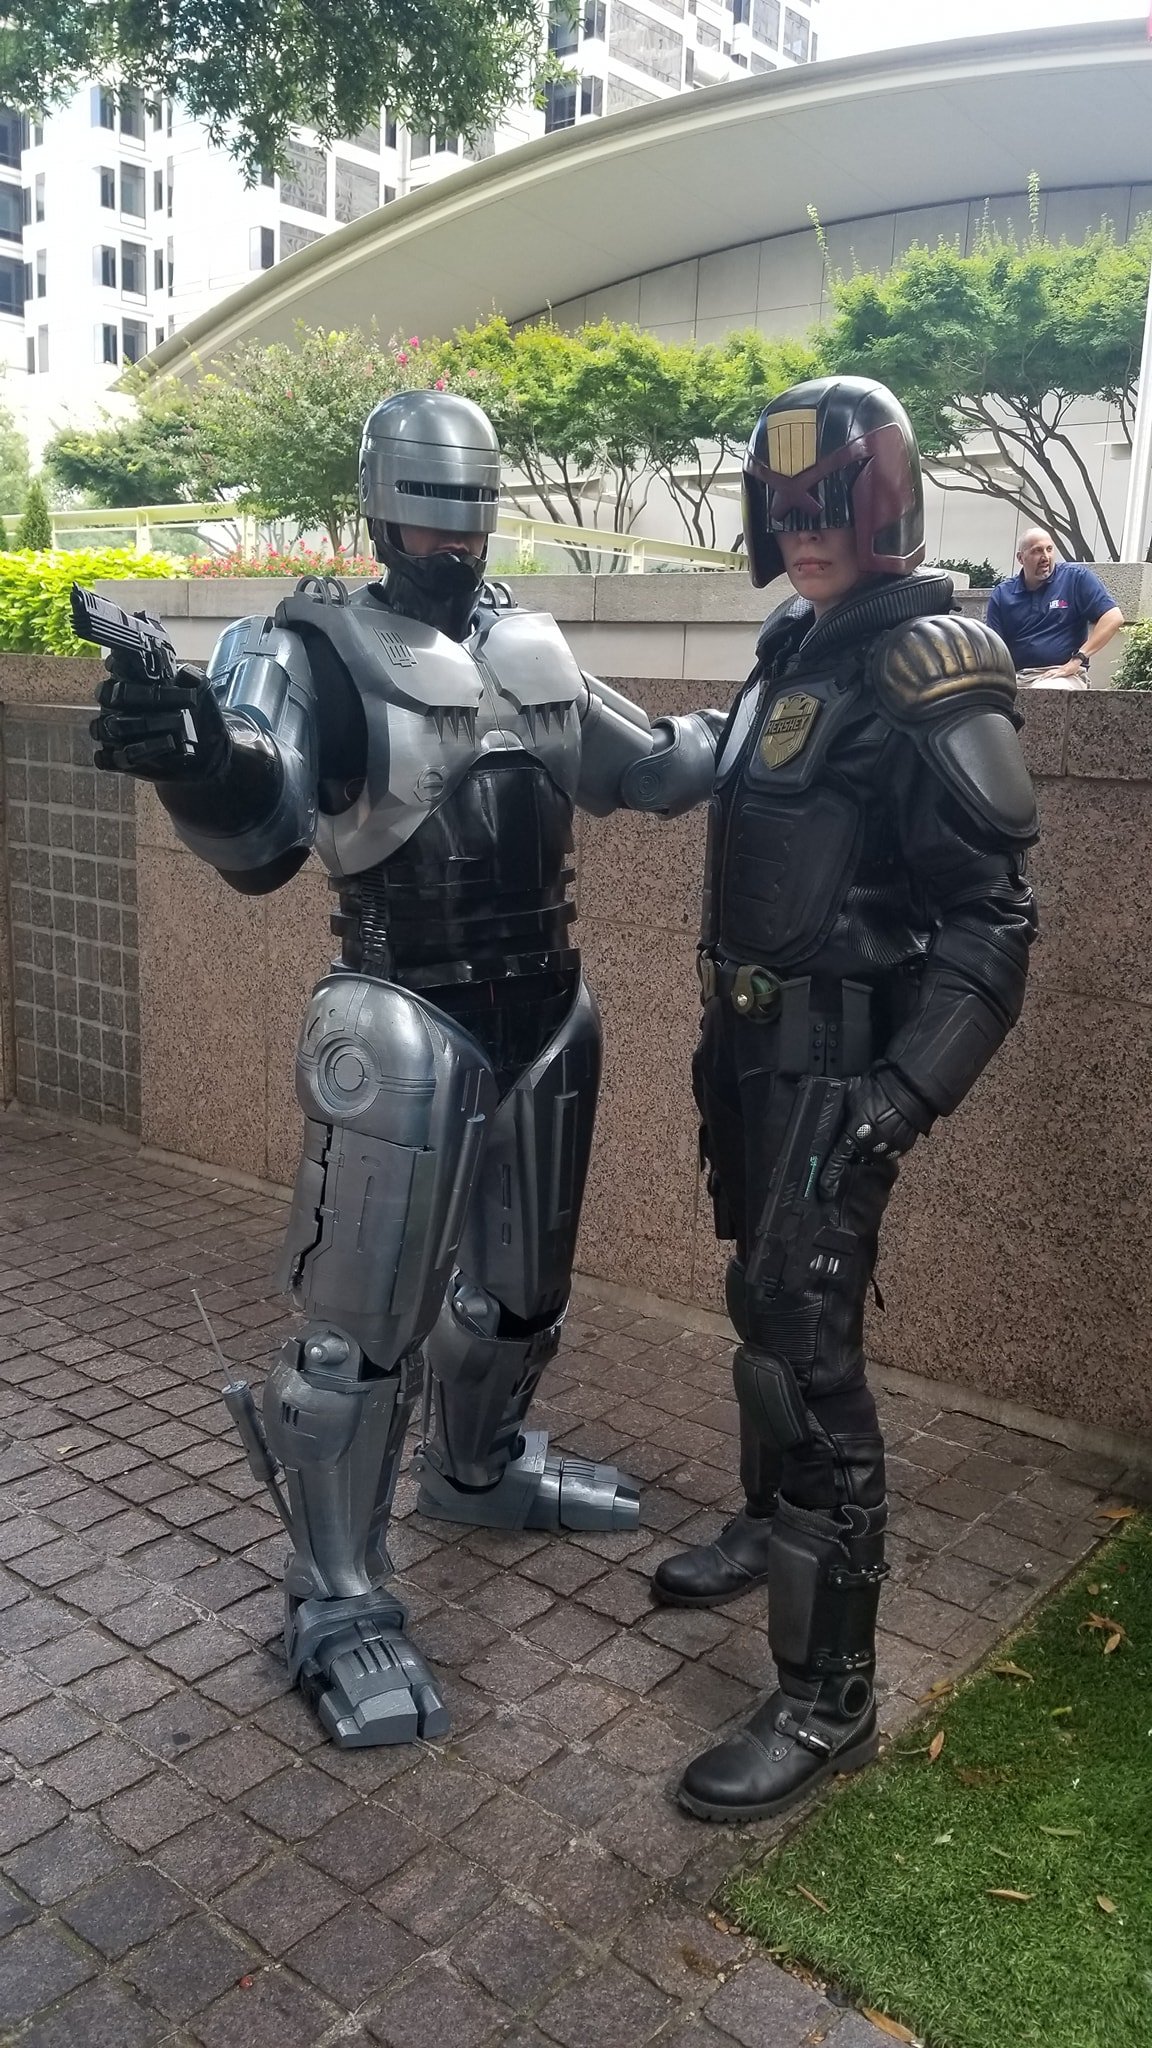 Judge Dredd cosplay with permission from Miss Sinister Cosplay